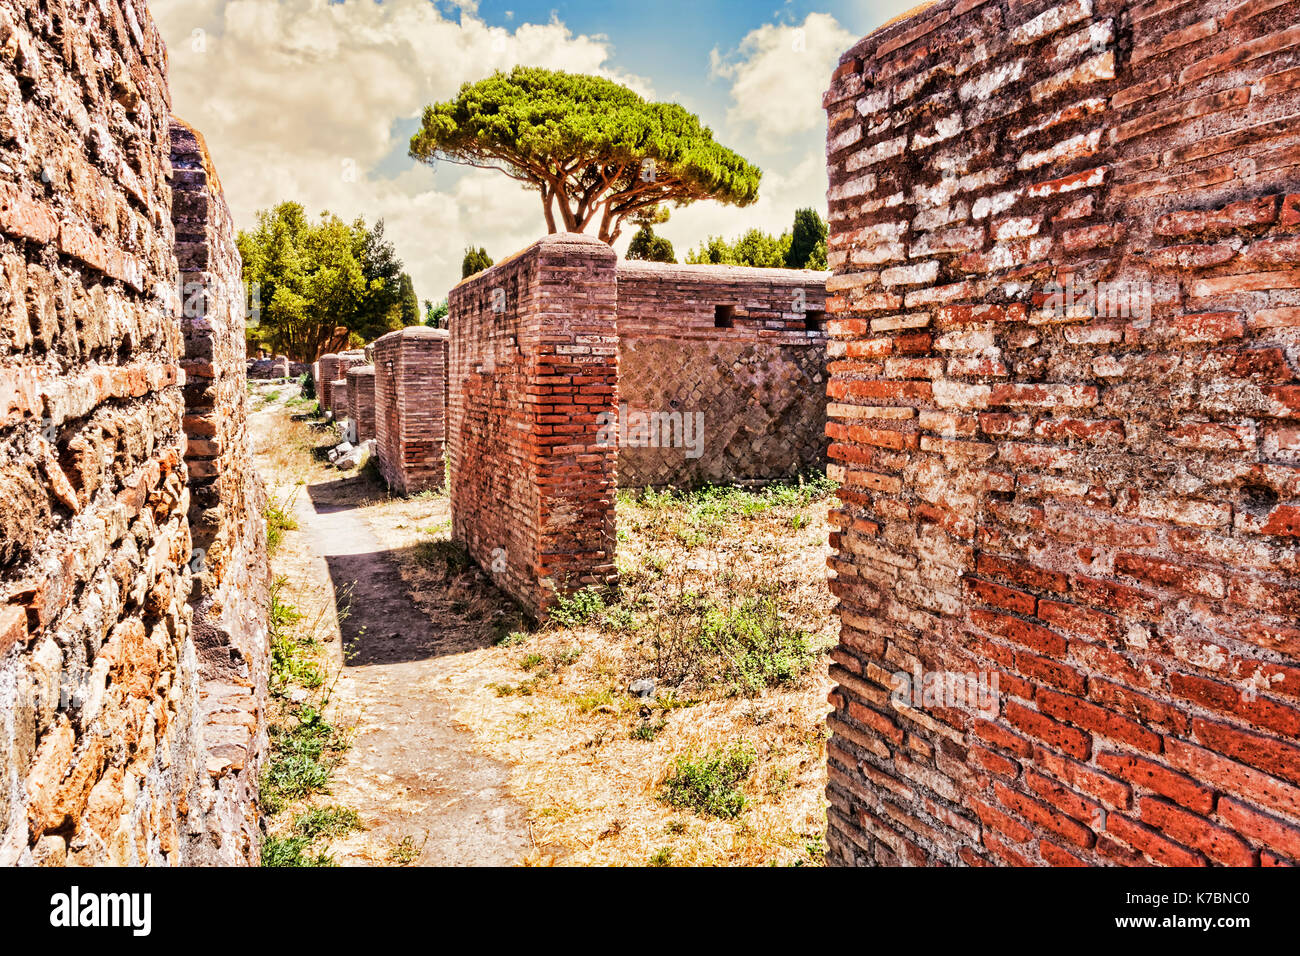 Street view in the archaeological Roman ruins in Ostia Antica - Rome - Italy Stock Photo